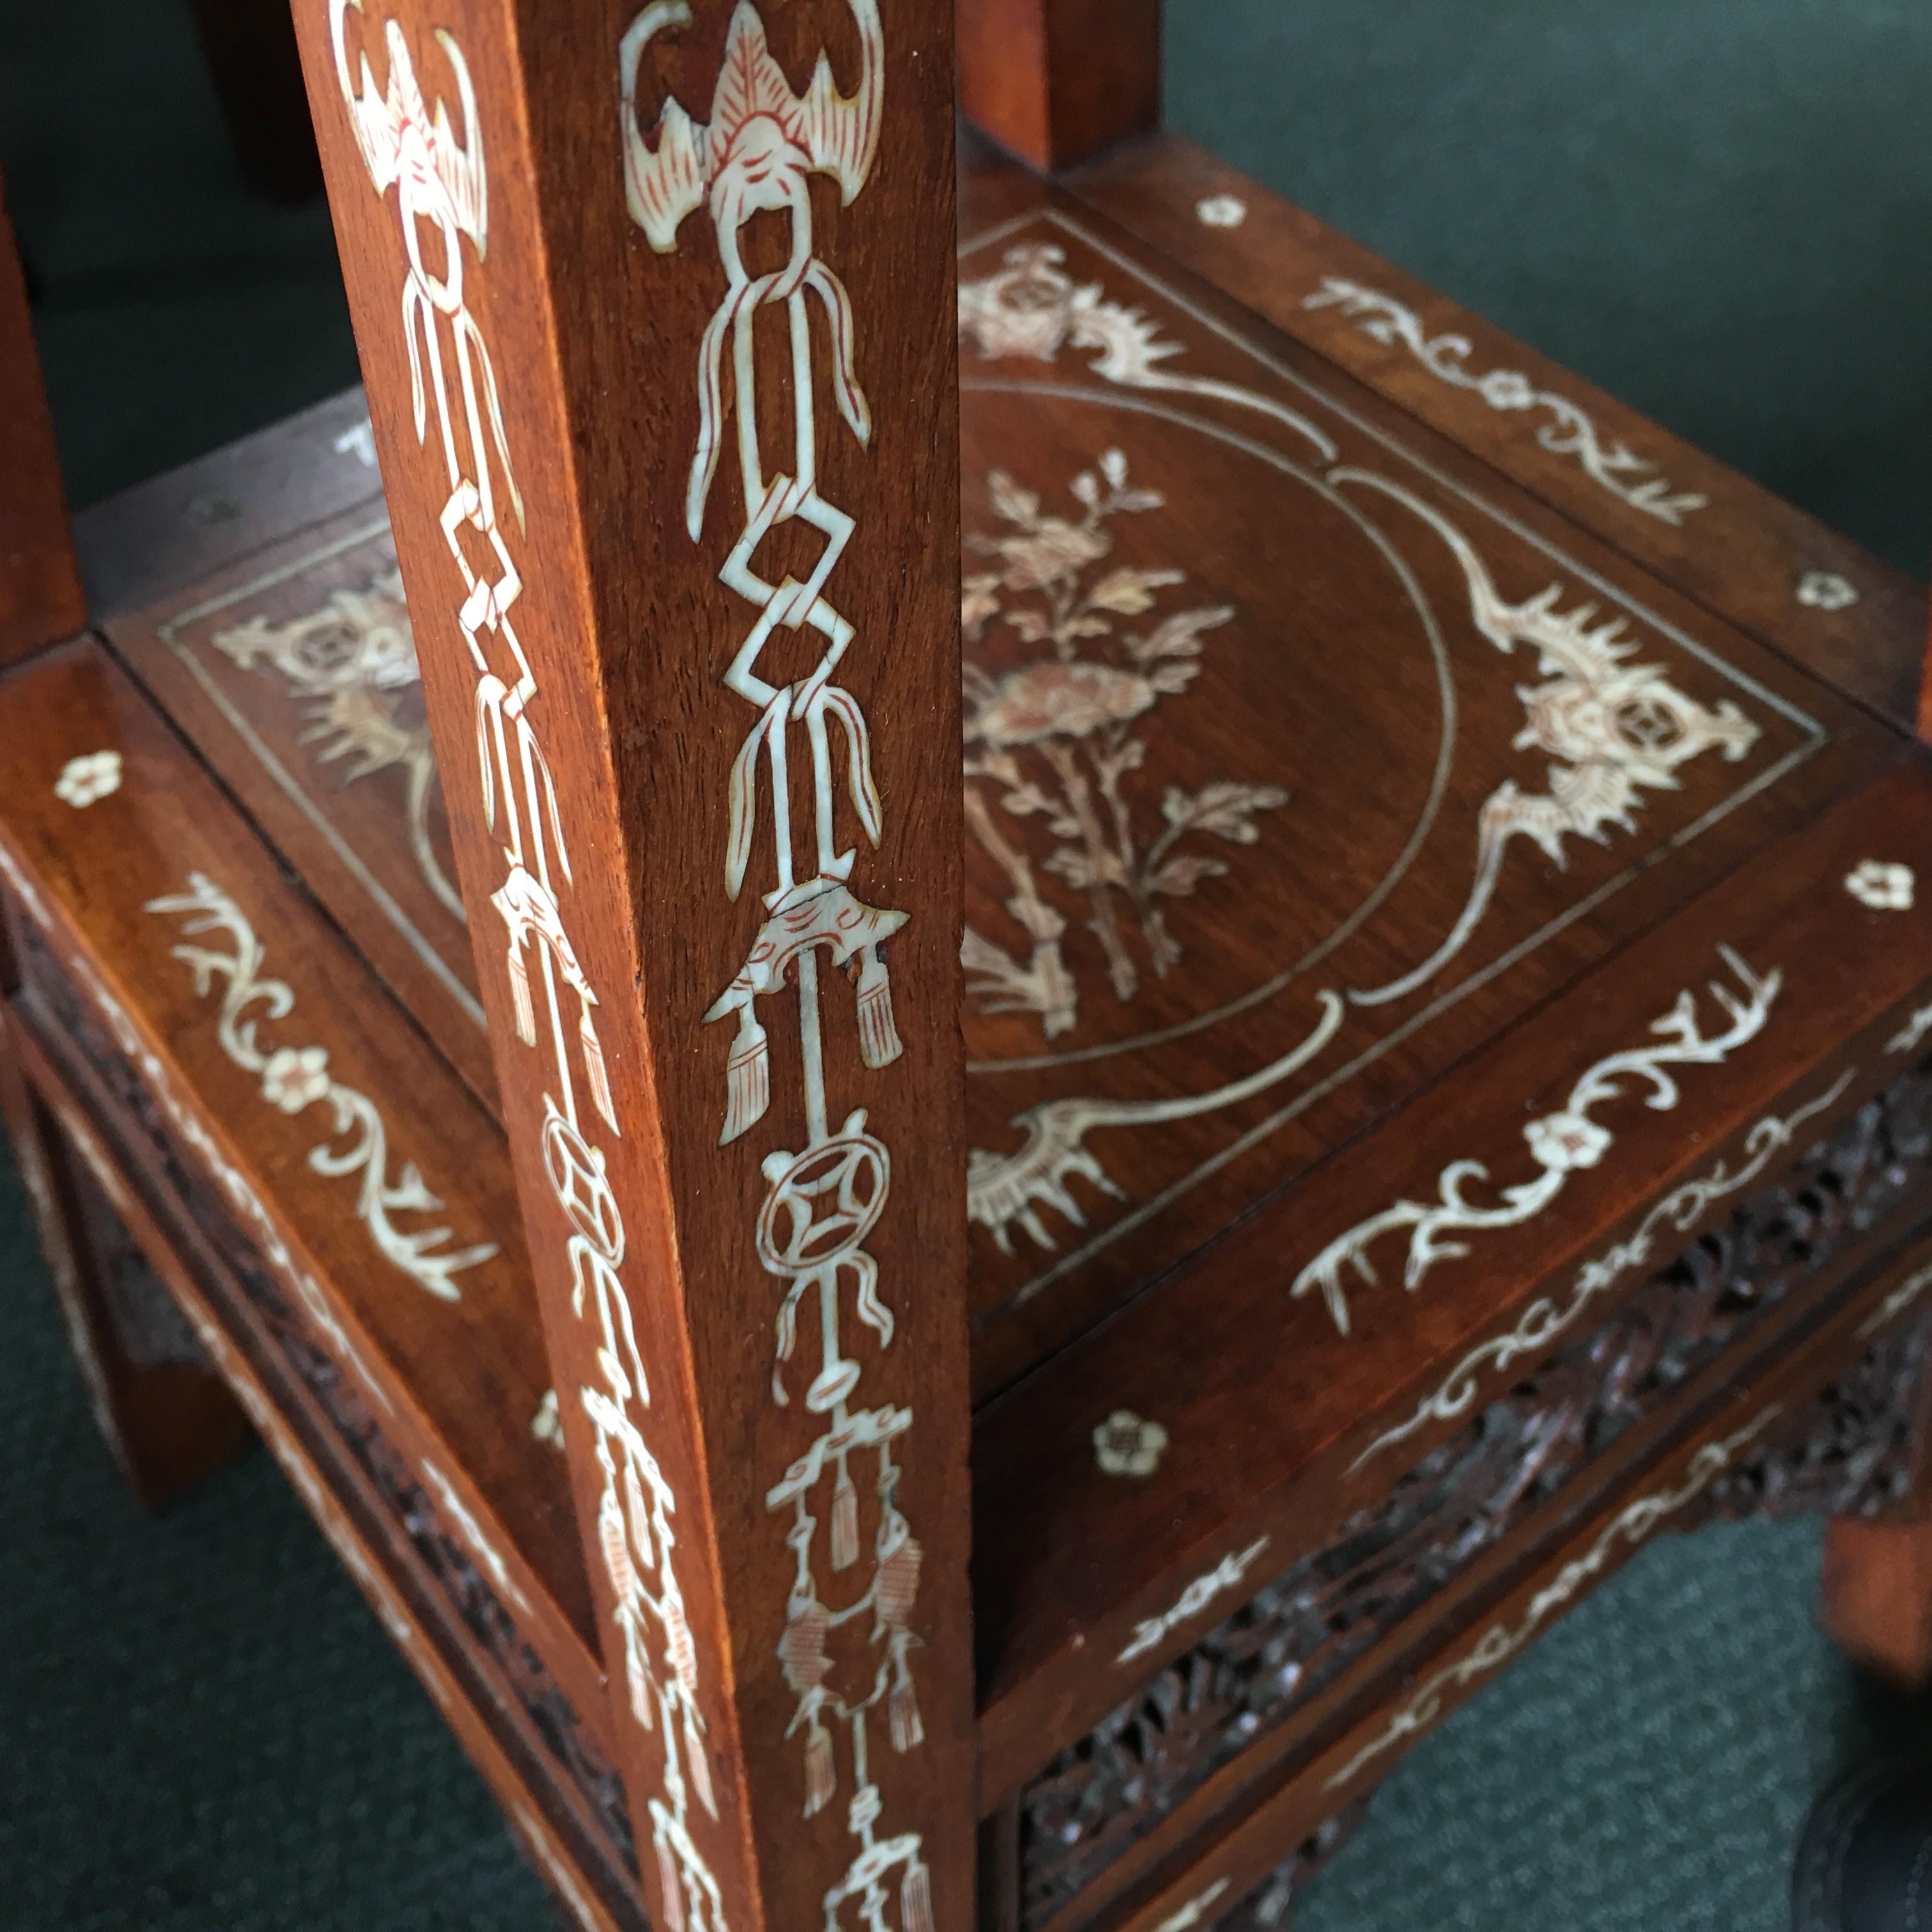 Chinese Hardwood Table with Fine Inlaid Bone Scenes, circa 1925 For Sale 1